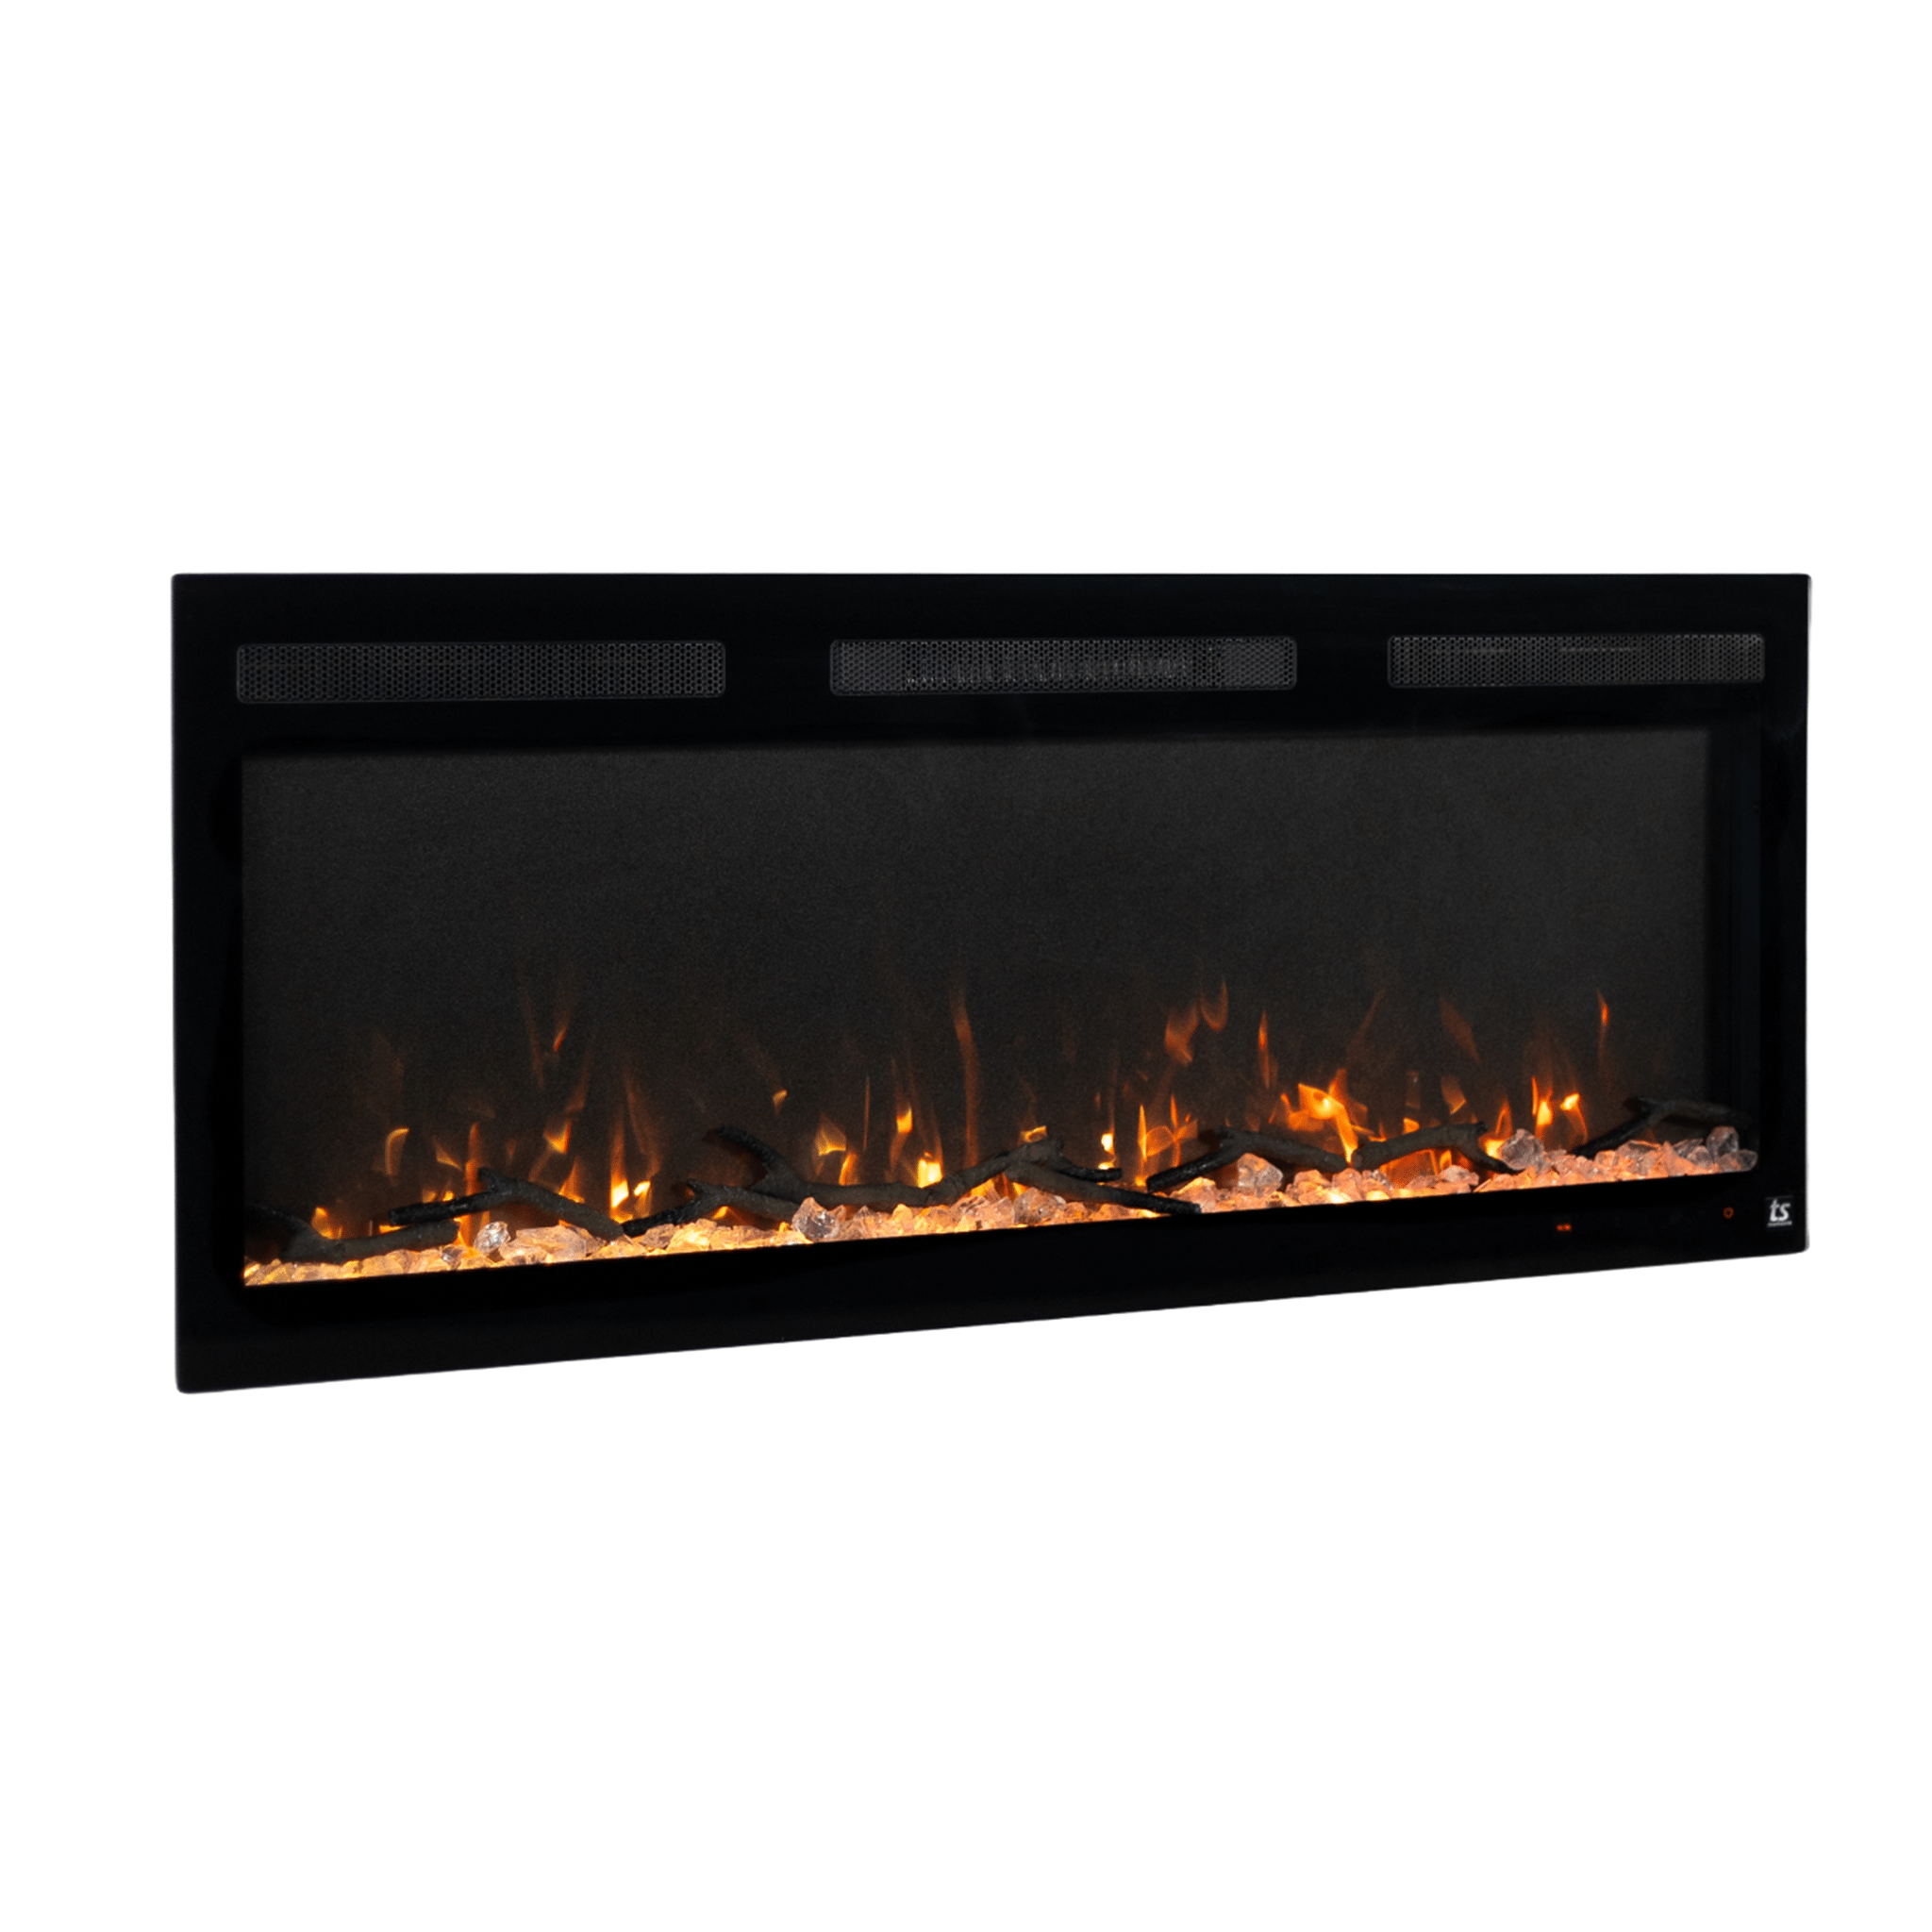 Sideline Fury 46 Inch Electric Fireplace on white angled